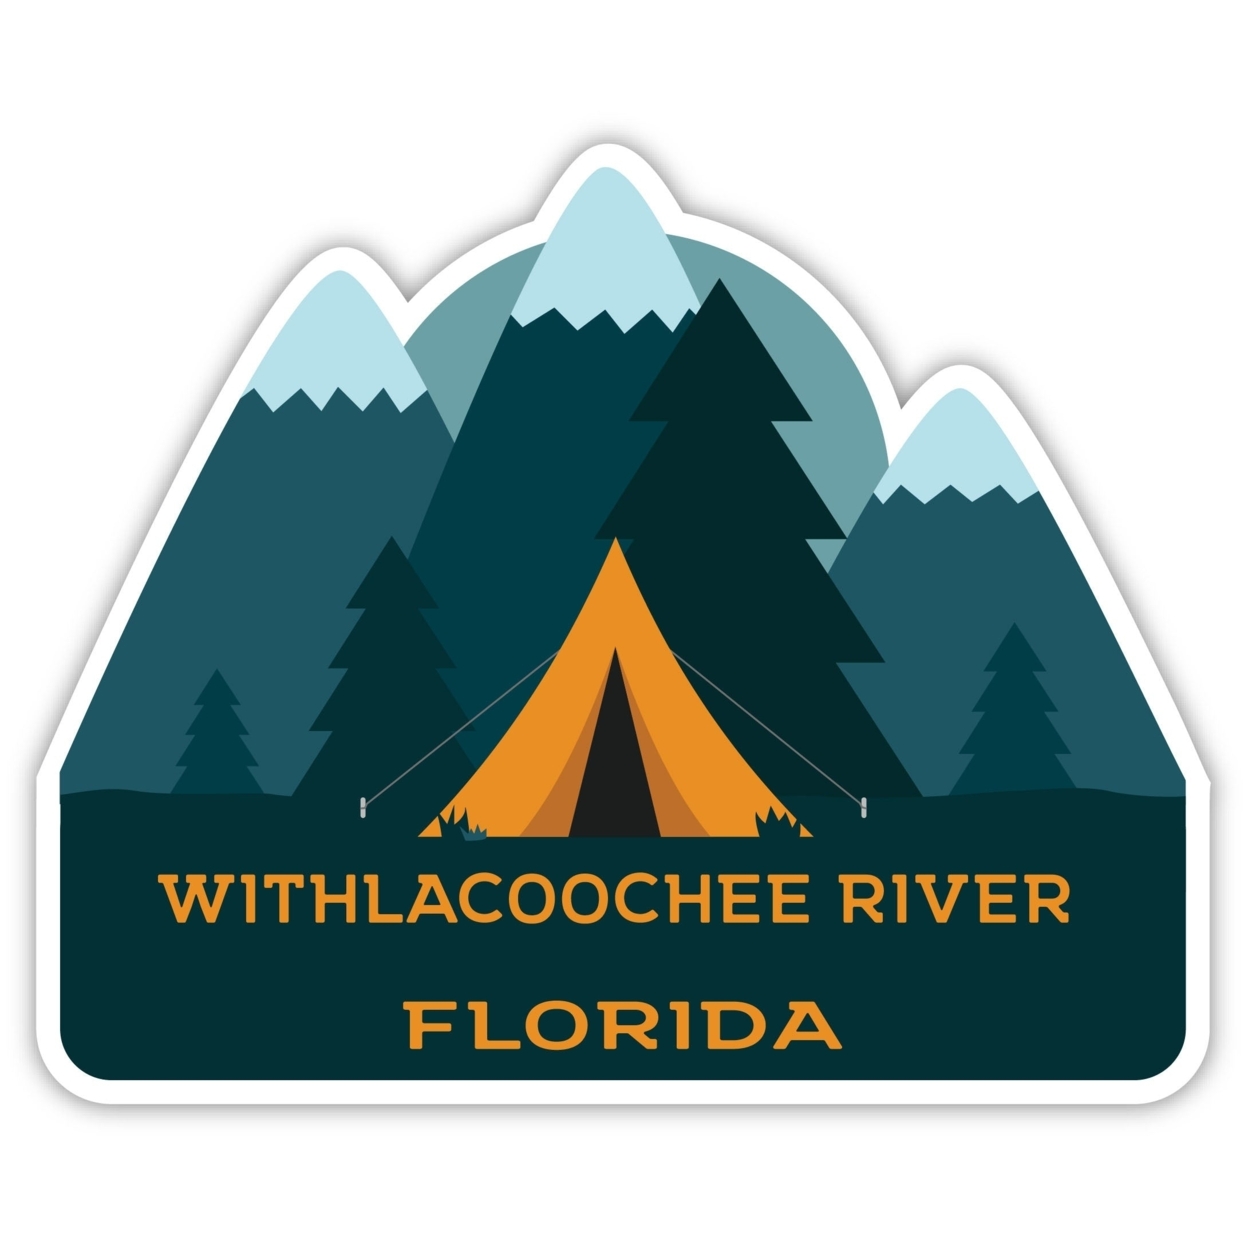 Withlacoochee River Florida Souvenir Decorative Stickers (Choose Theme And Size) - Single Unit, 2-Inch, Tent